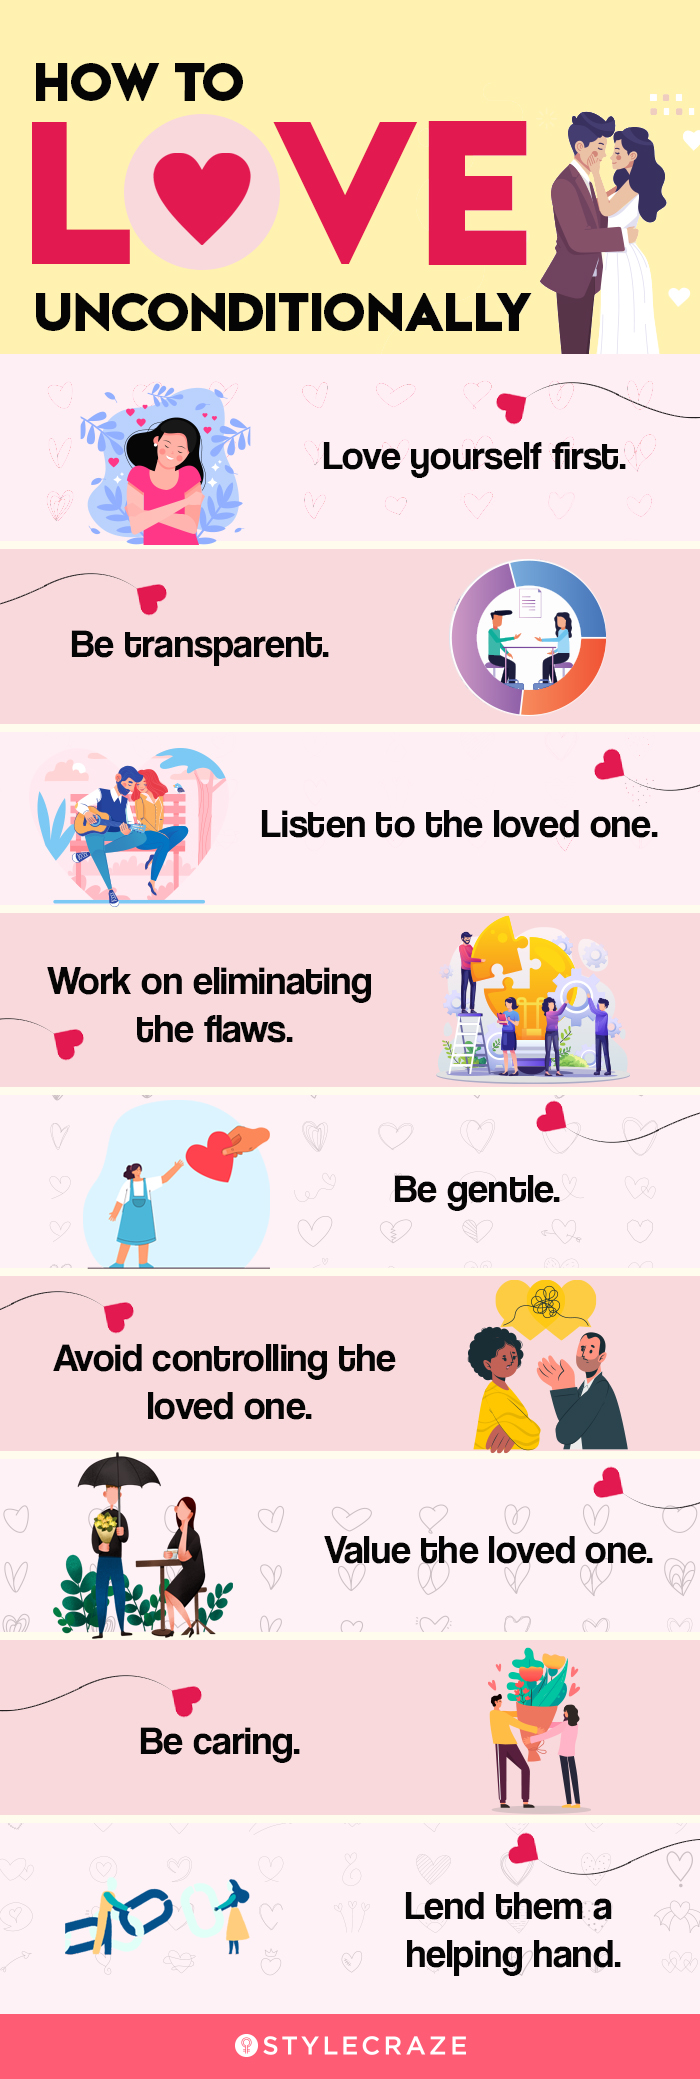 how to love unconditionally [infographic]